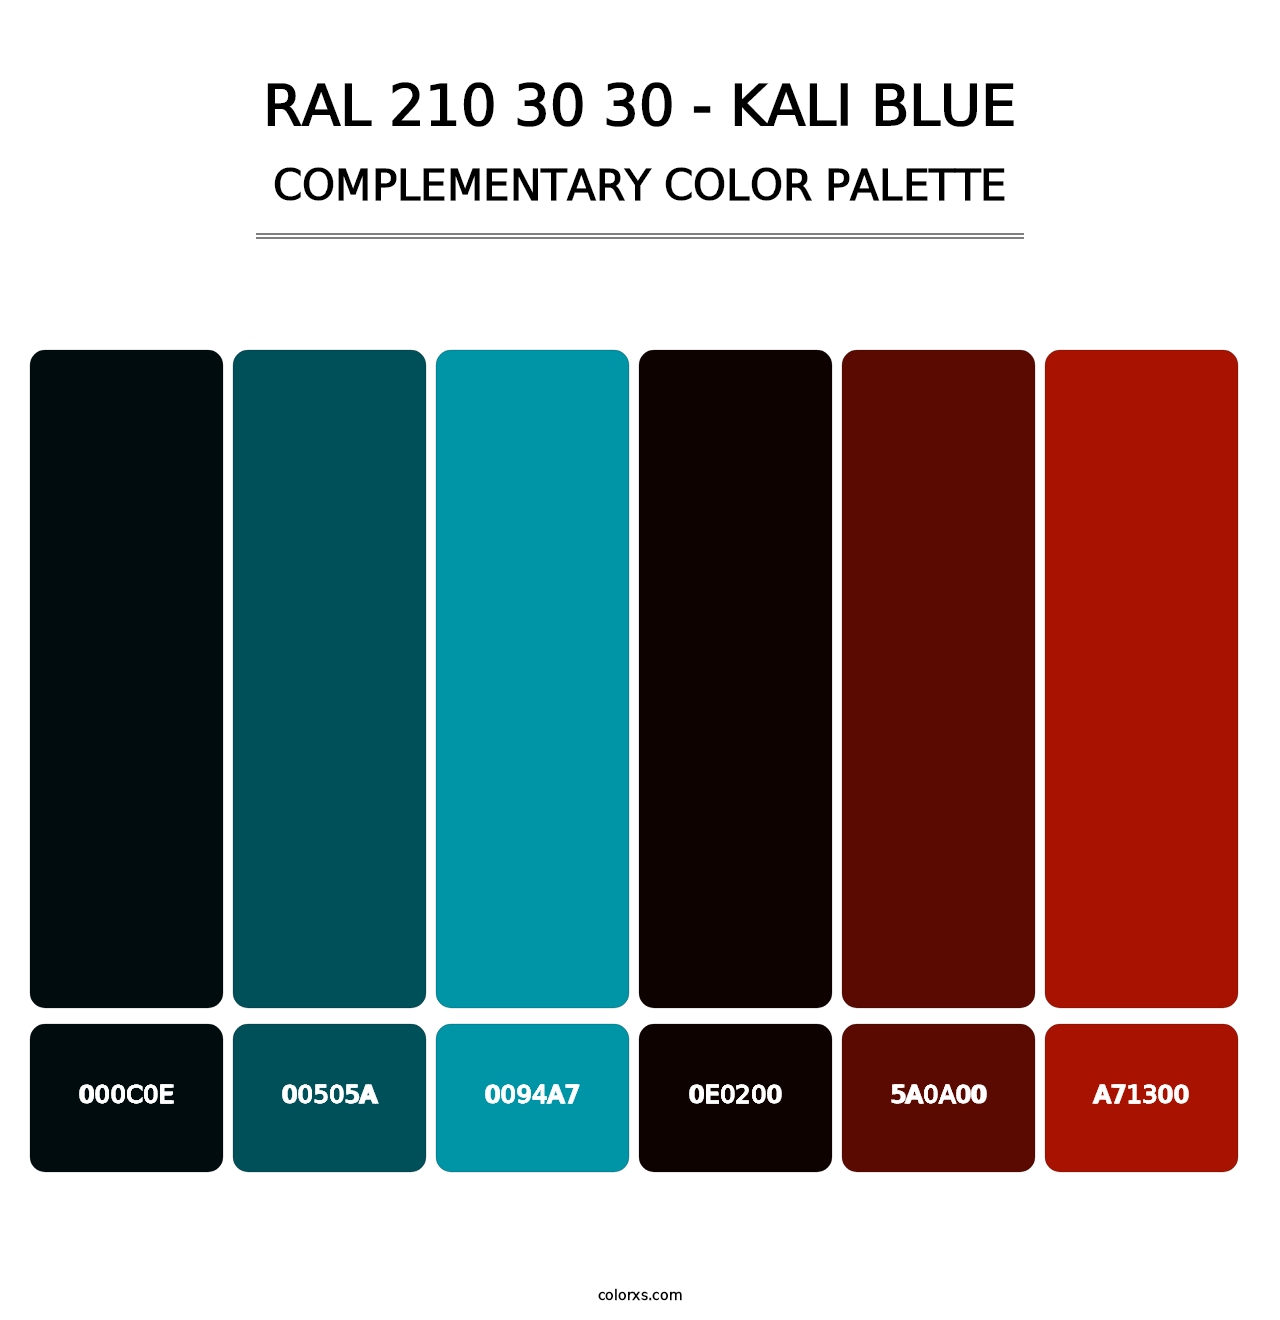 RAL 210 30 30 - Kali Blue - Complementary Color Palette